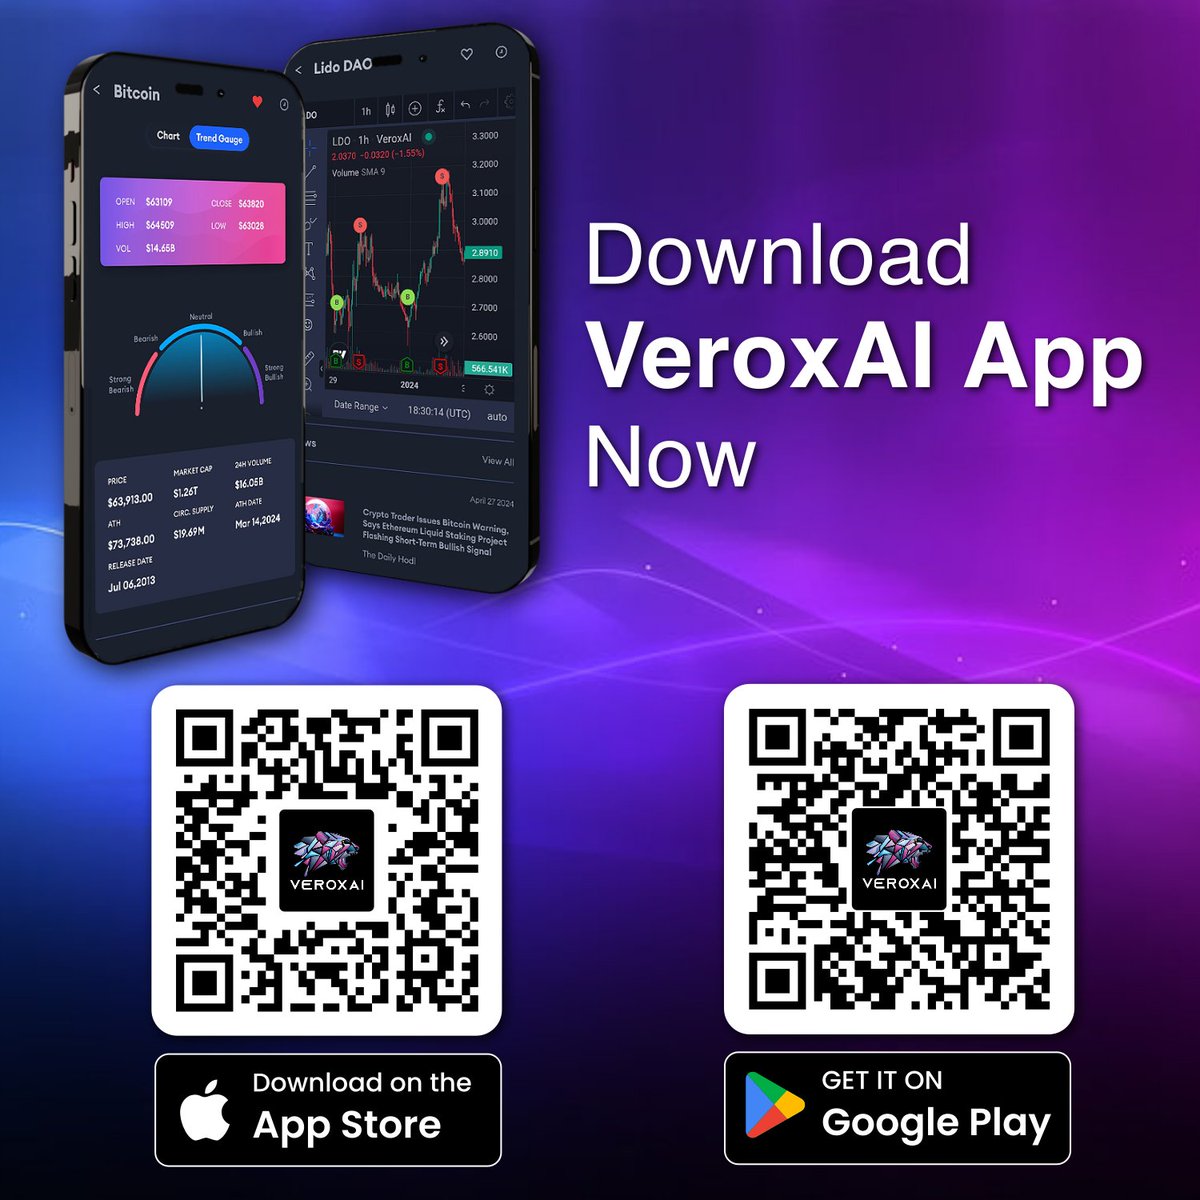 @Verox_AICrypto  big shout out to #VRX #VEROX just got my rewards from the most recent comp! 
Nice to see a real #utility #grinding for its #comminity #ai #tradingsignal #ETH #BULLRUN #IYKYK #best and #OG #AISIGNALS #KNOWTHEFUTURE